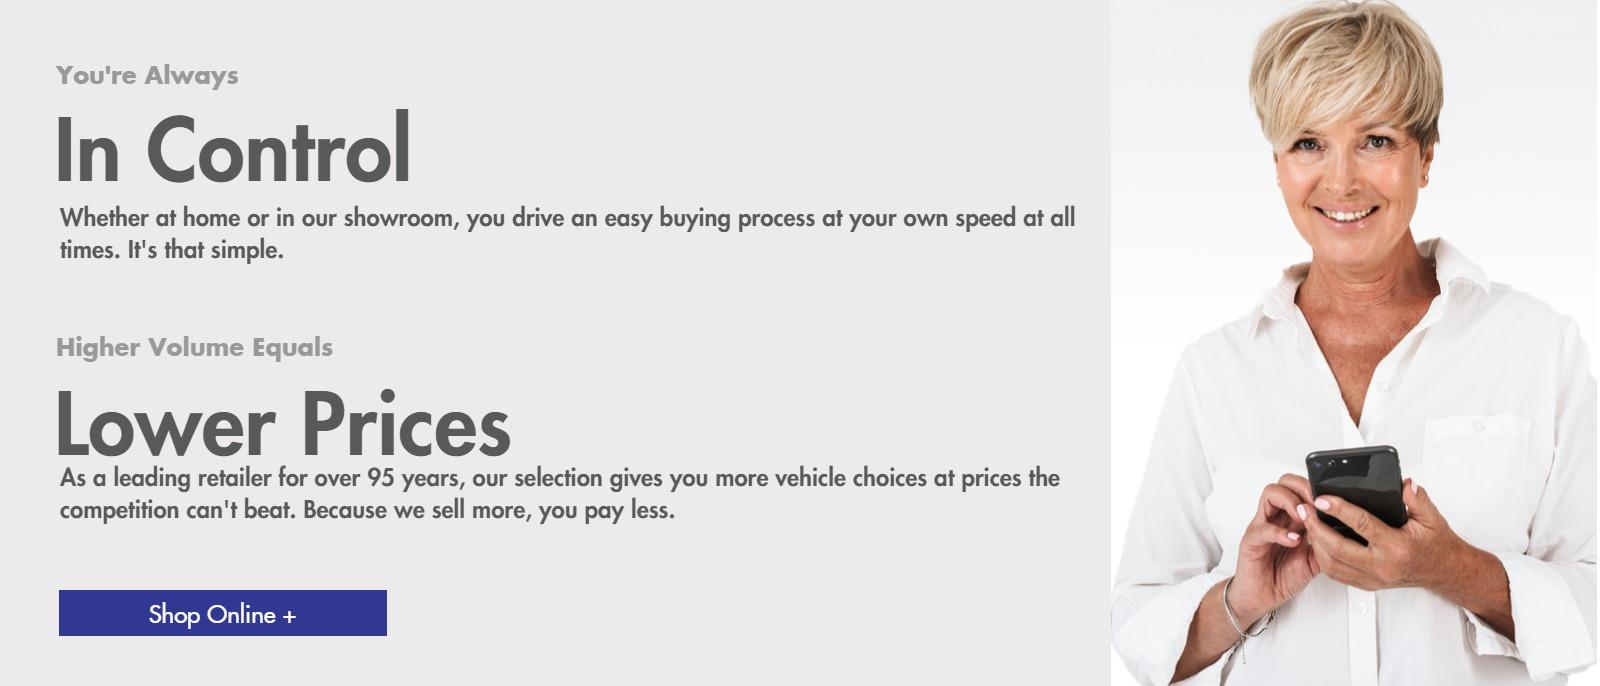 You're Always In Control
Whether at home or in our showroom, you drive an easy buying process at your own speed at all
times. It's that simple.

Higher Volume Equals Lower Prices
As a leading retailer for over 95 years, our selection gives you more vehicle choices at prices the
competition can't beat. Because we sell more, you pay less.